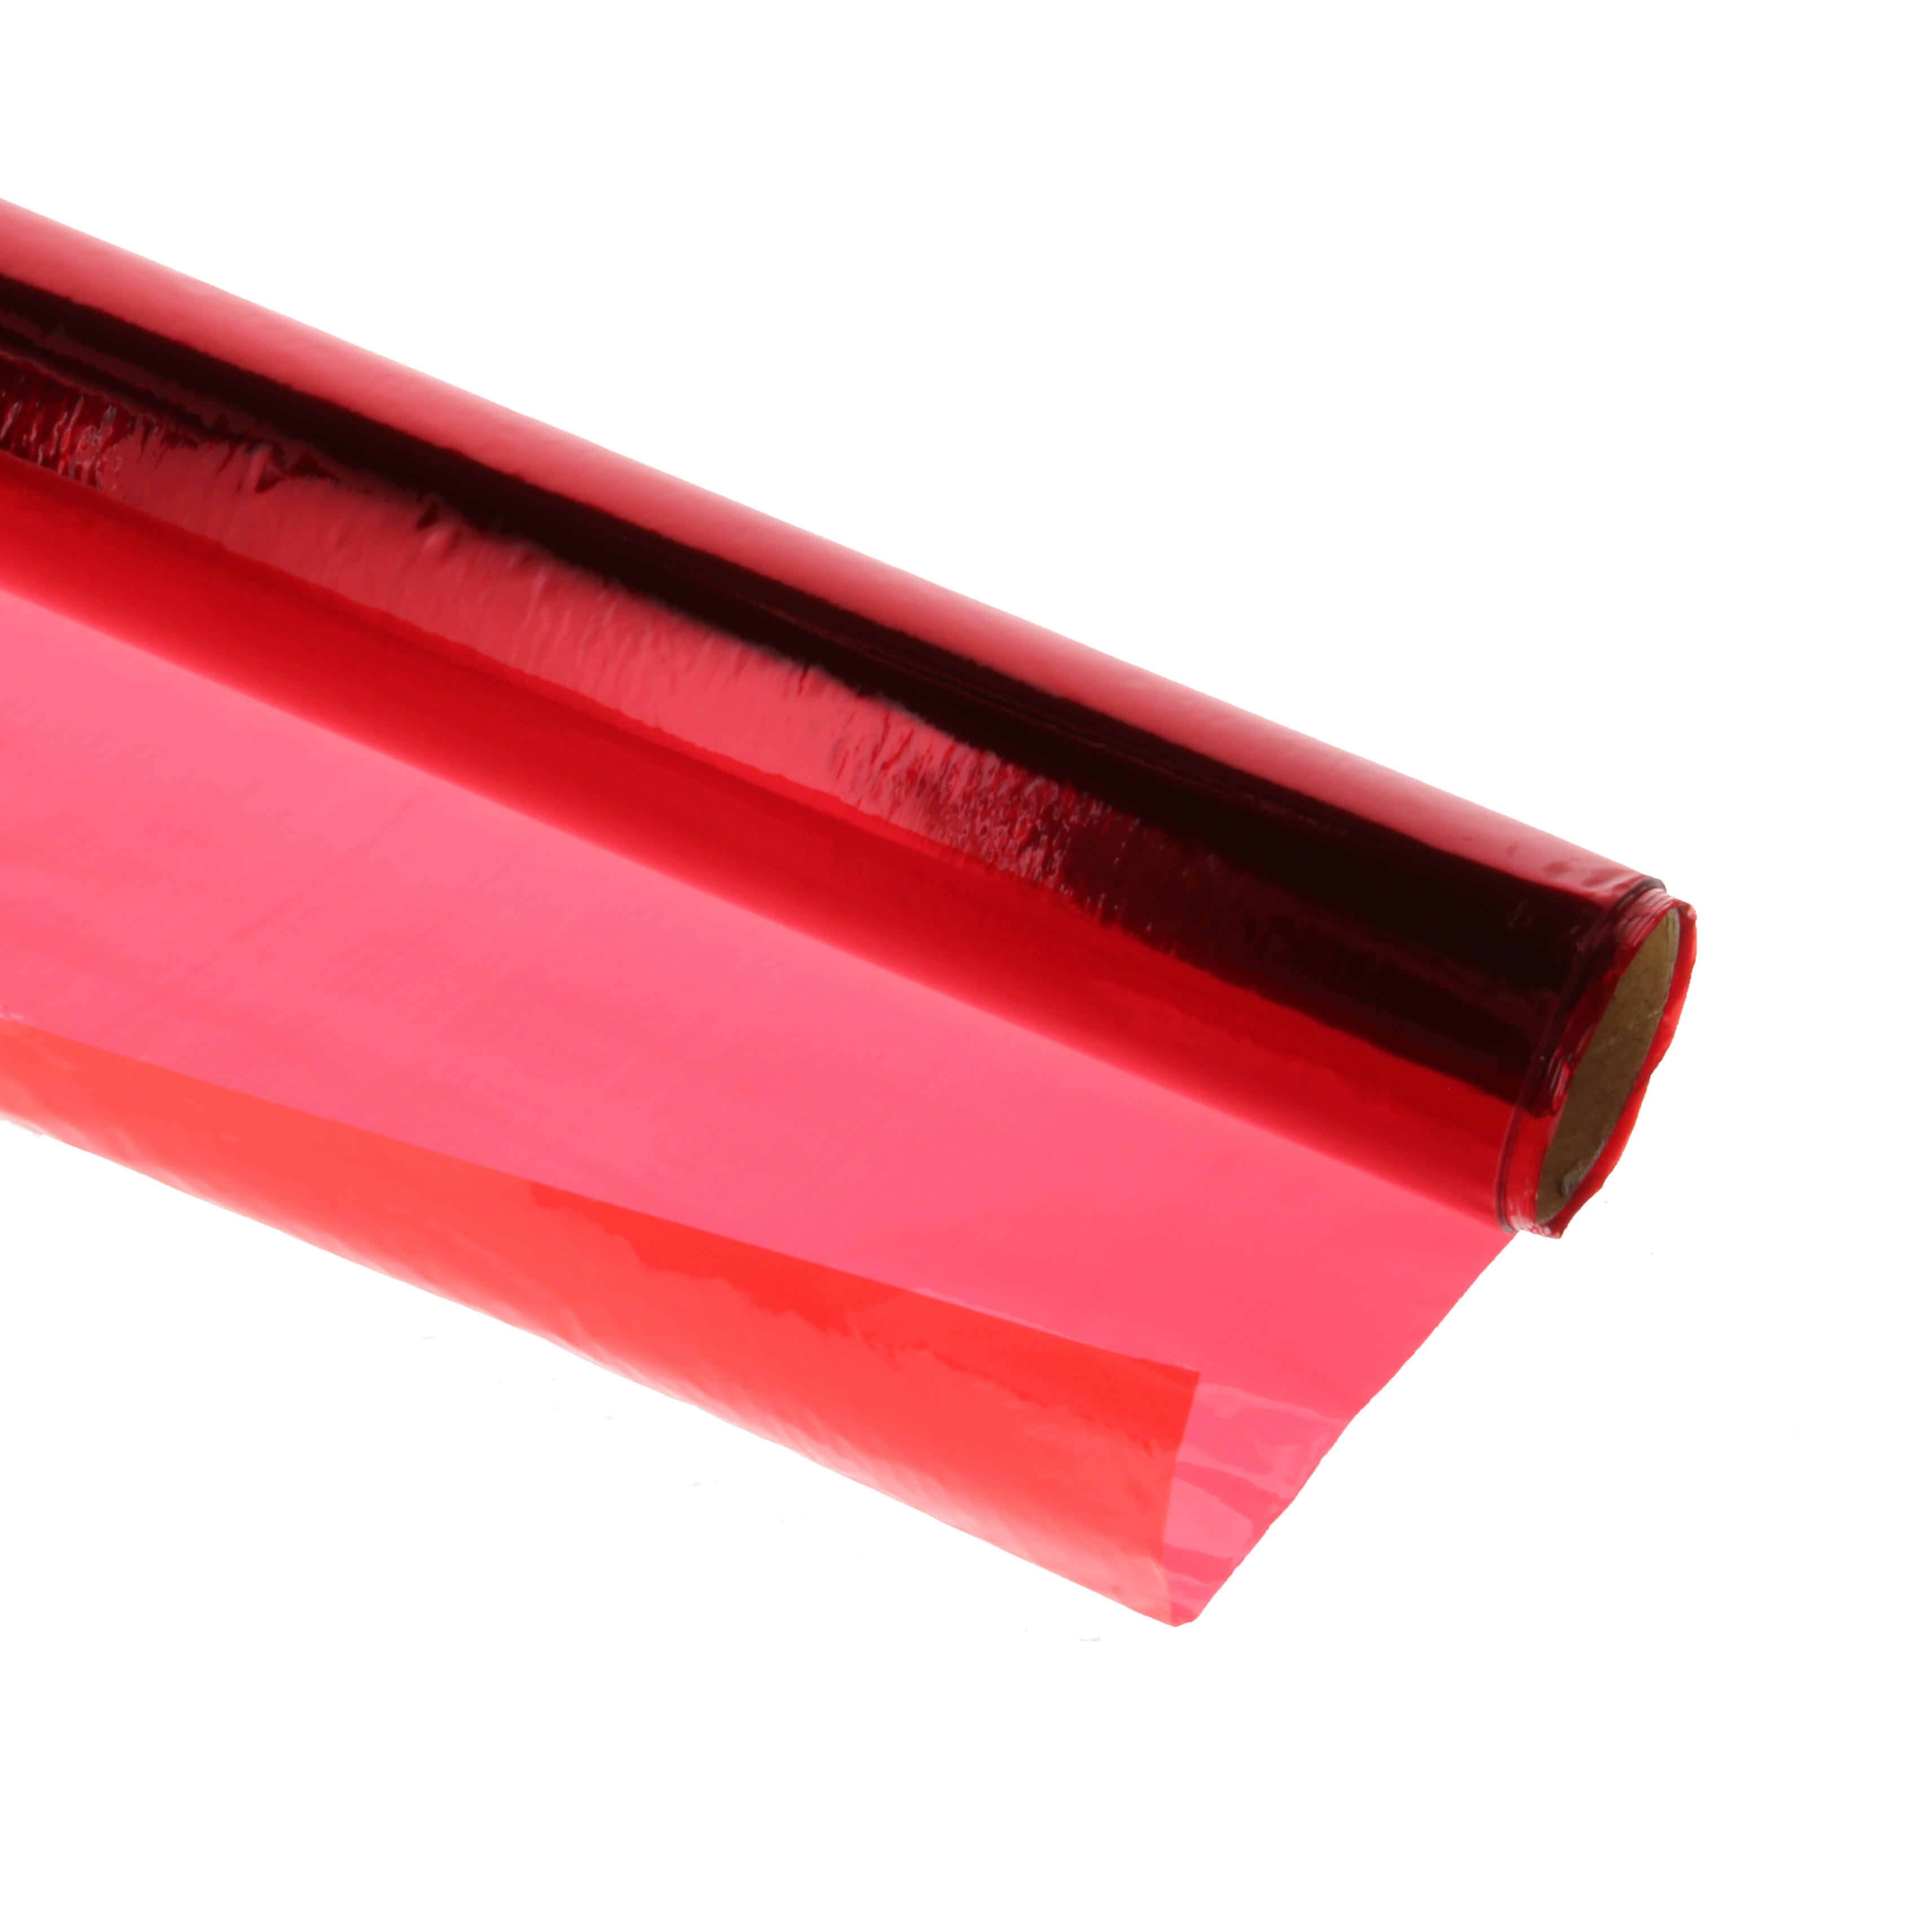 Cellophane Roll Red - 508mm x 4.5m